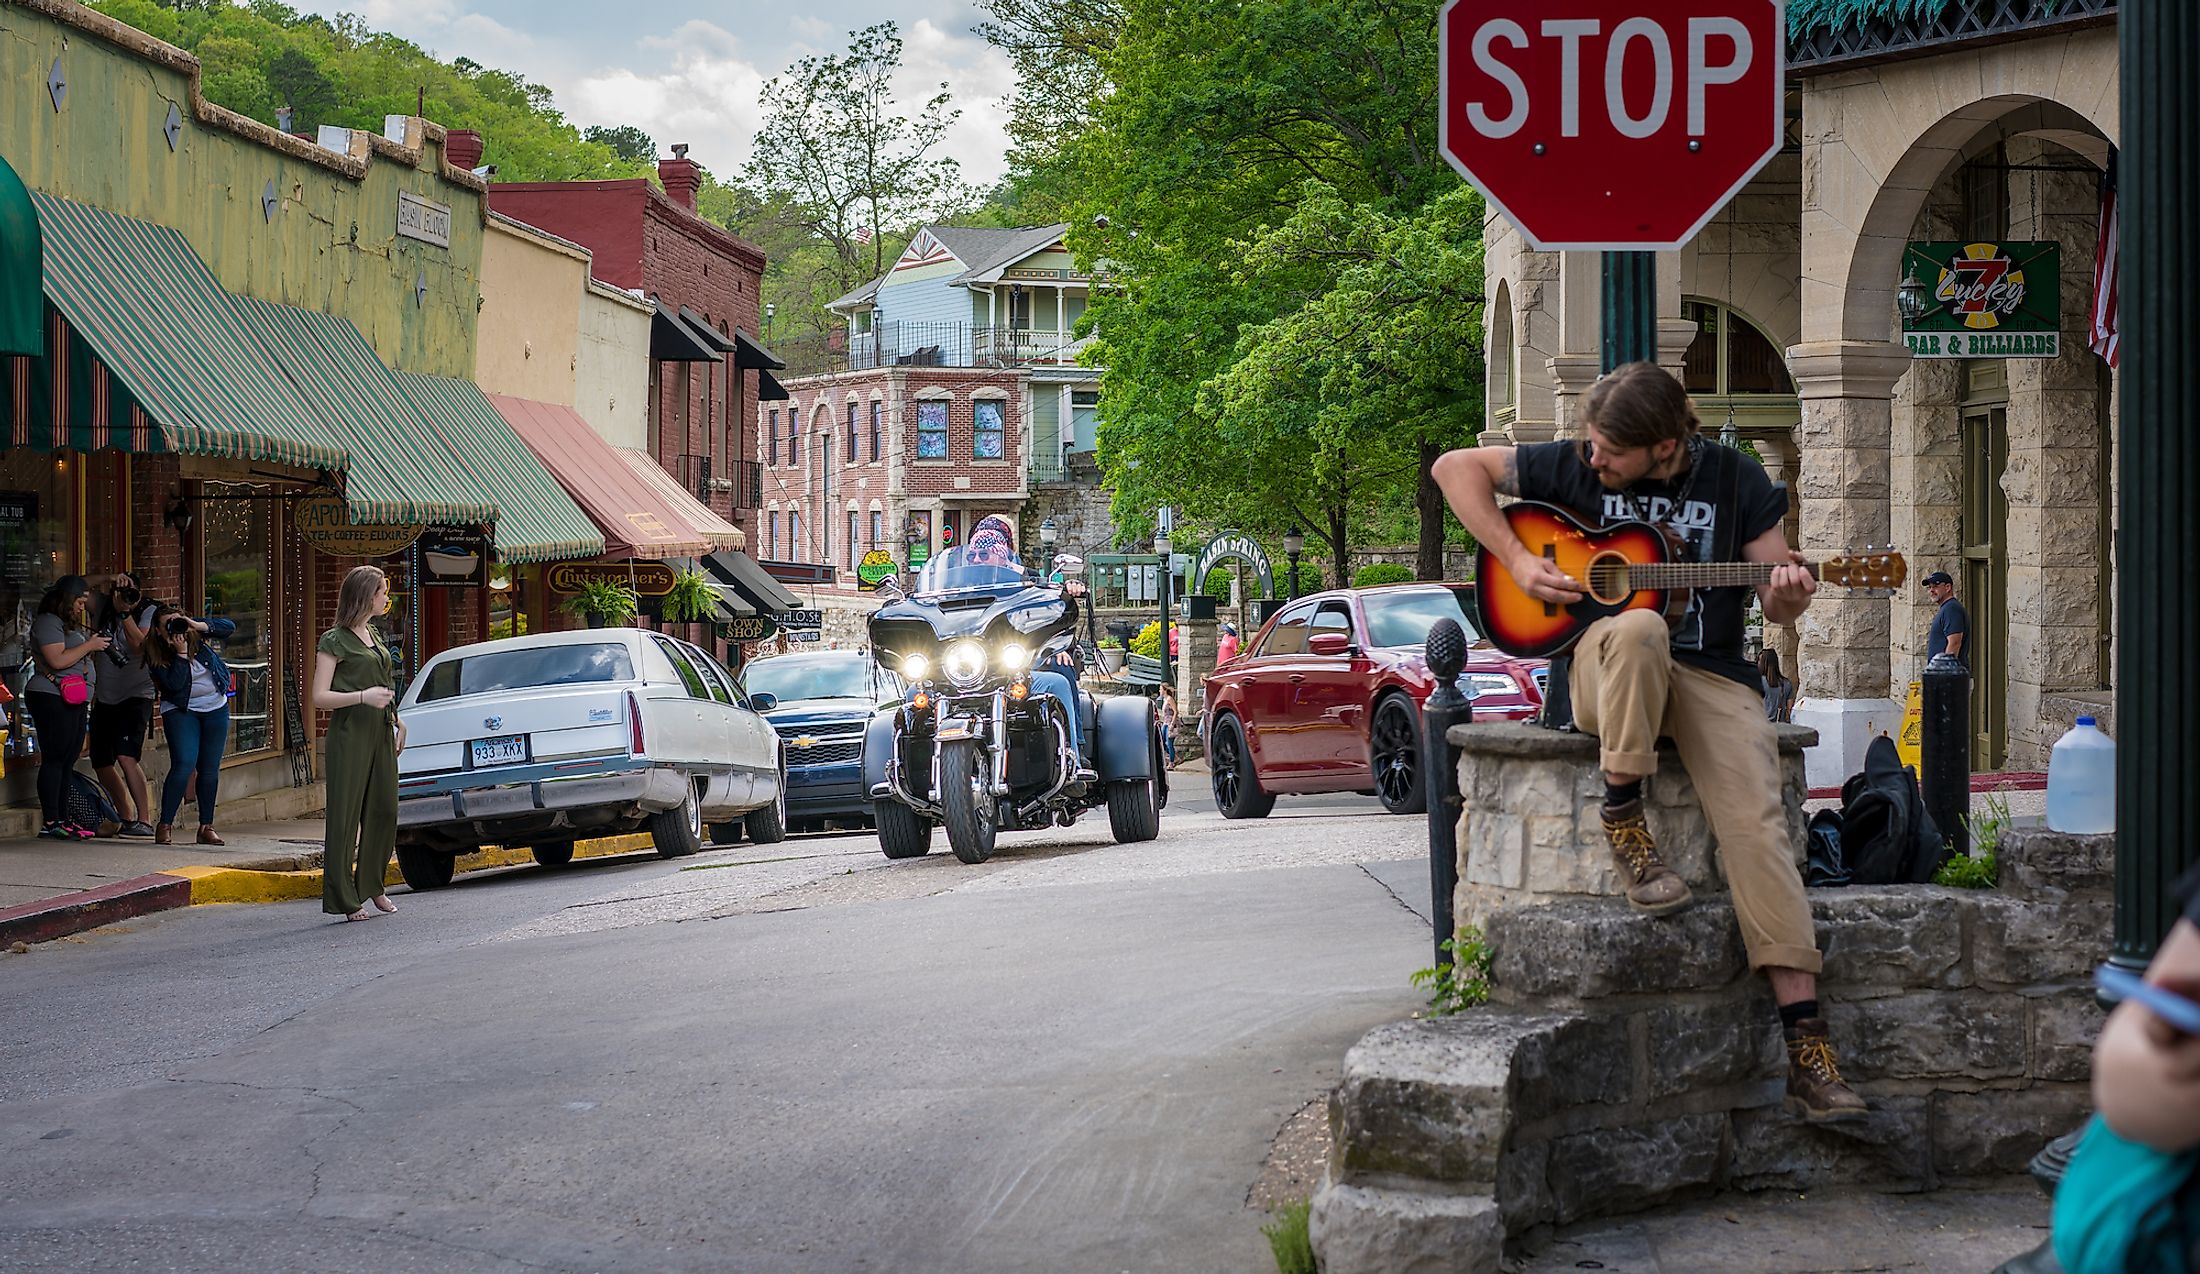  A man playing a guitar in the downtown area of Eureaka Springs, Arkansas. Editorial credit: shuttersv / Shutterstock.com